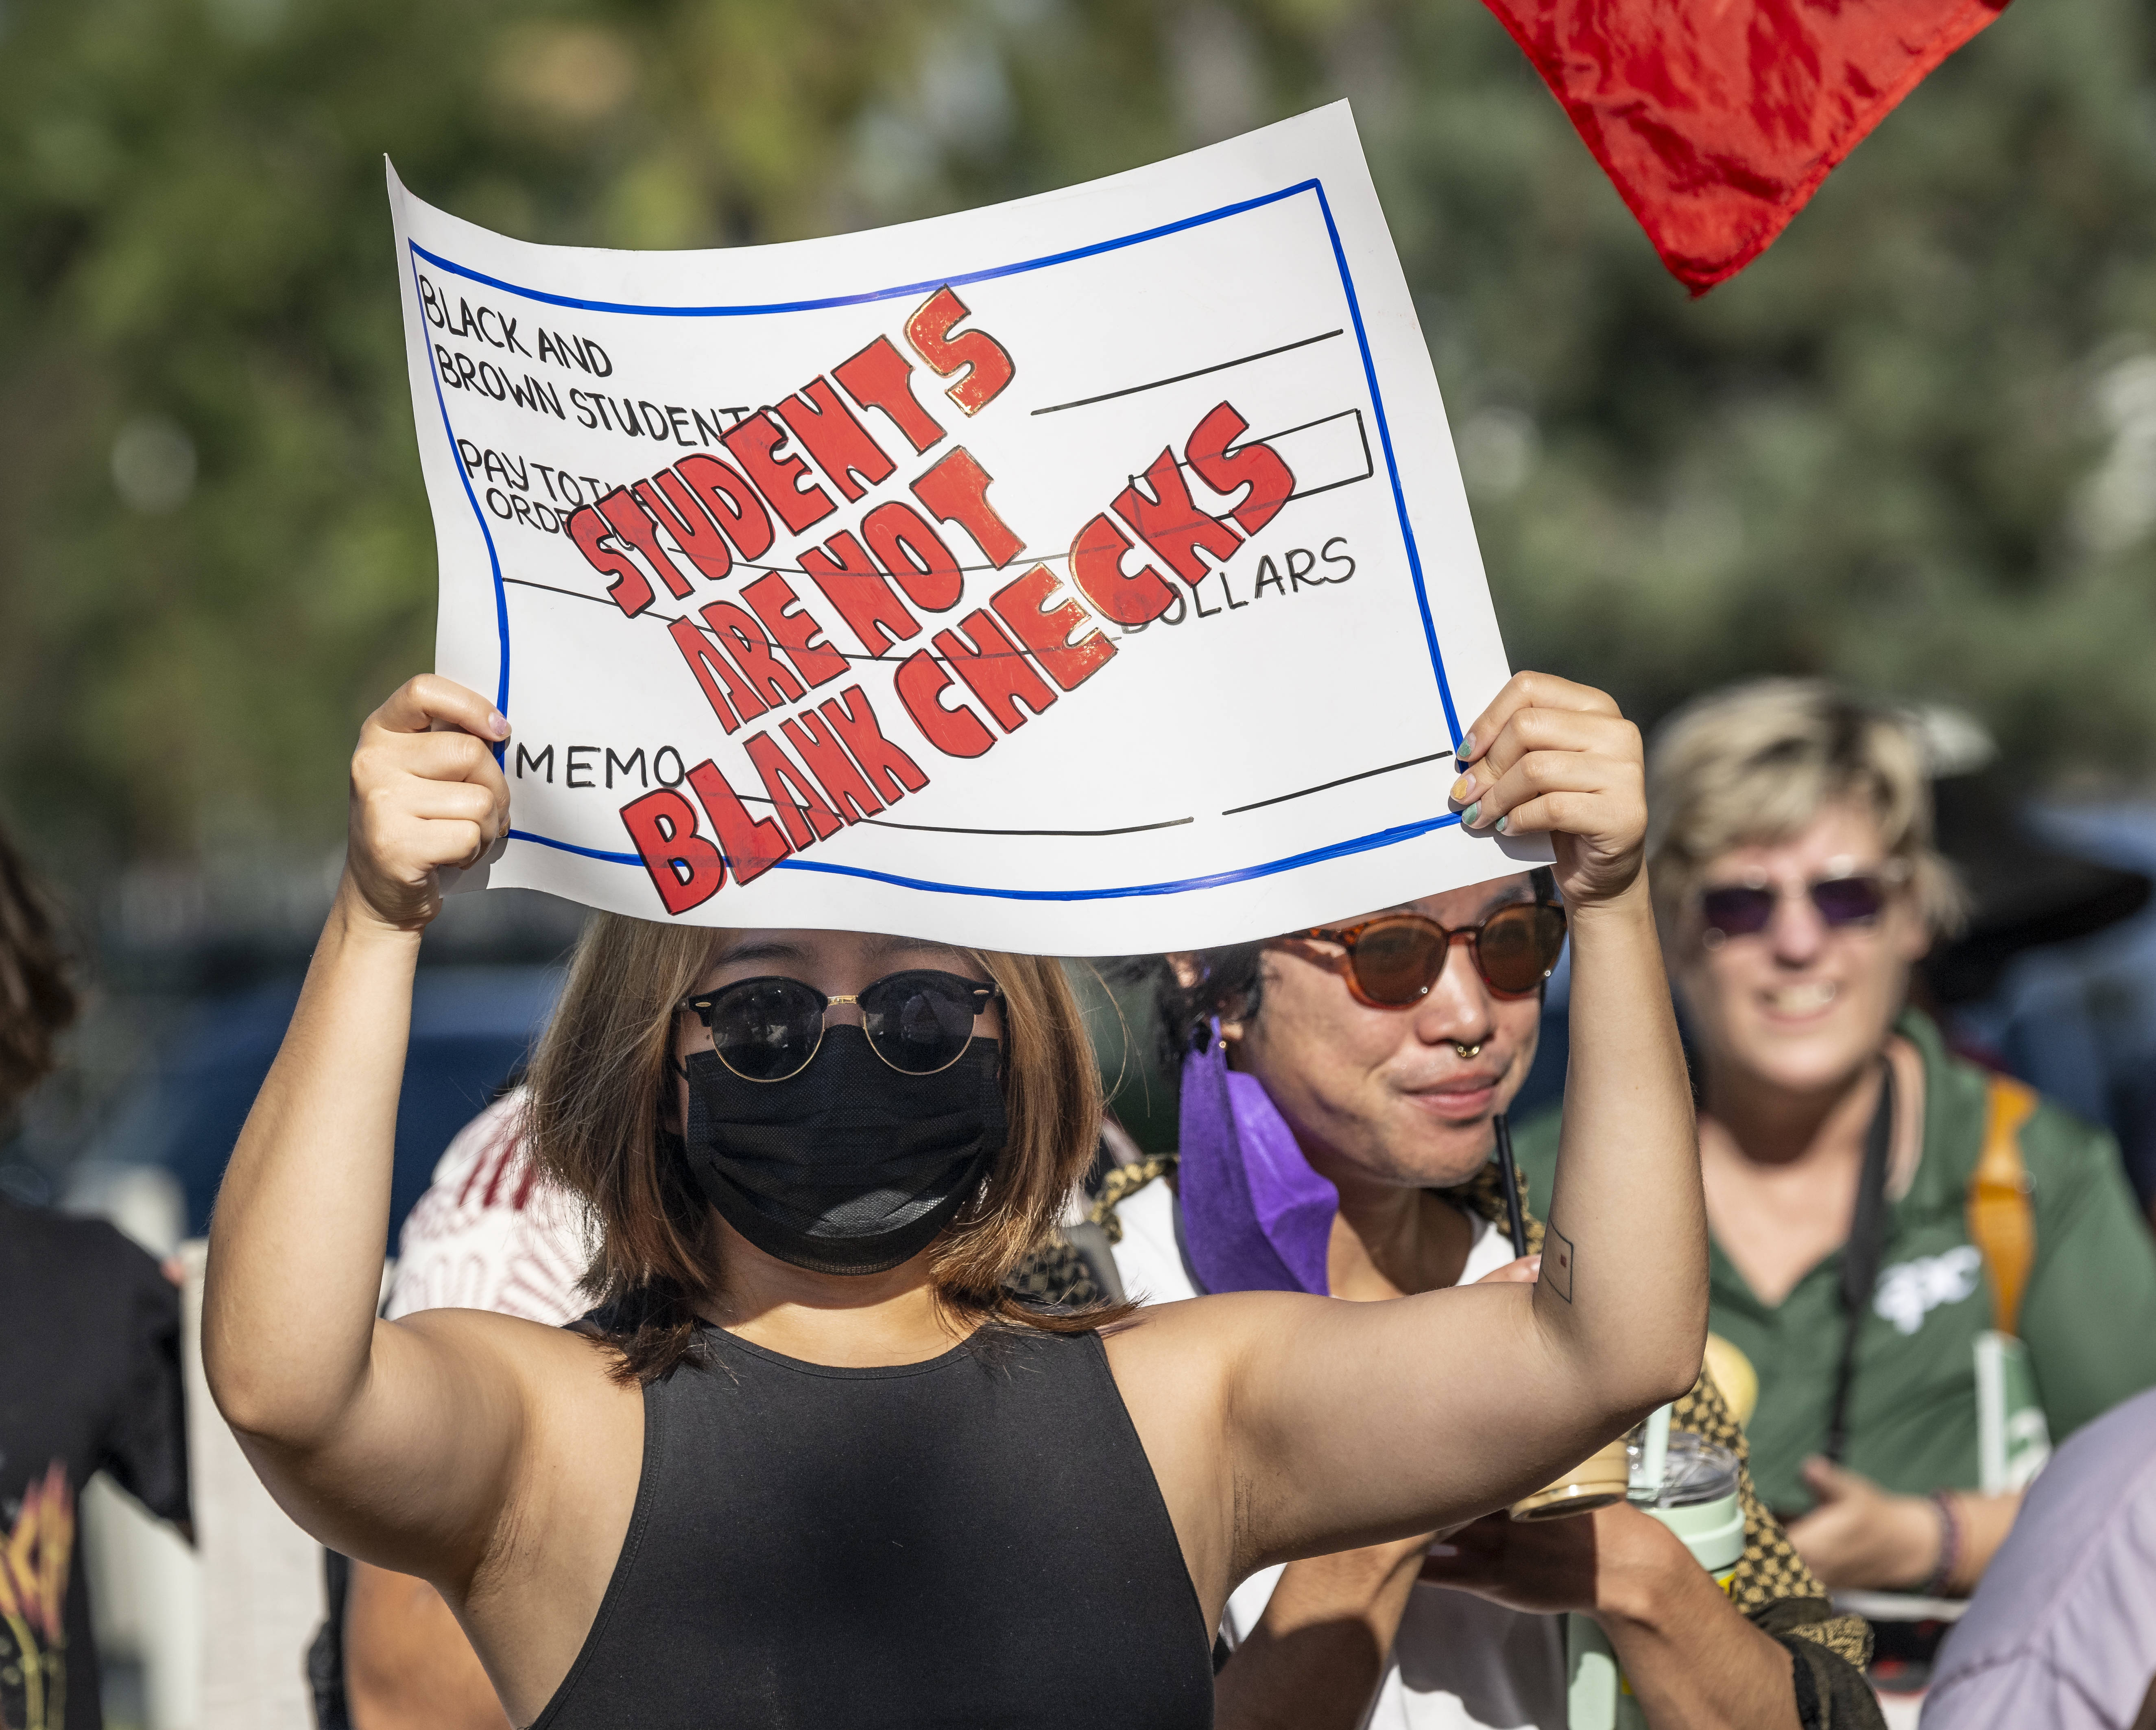 A woman wearing a face-mask and sunglasses holds up a protest sign designed to look like a check that reads “Students are not blank checks” in red letters.